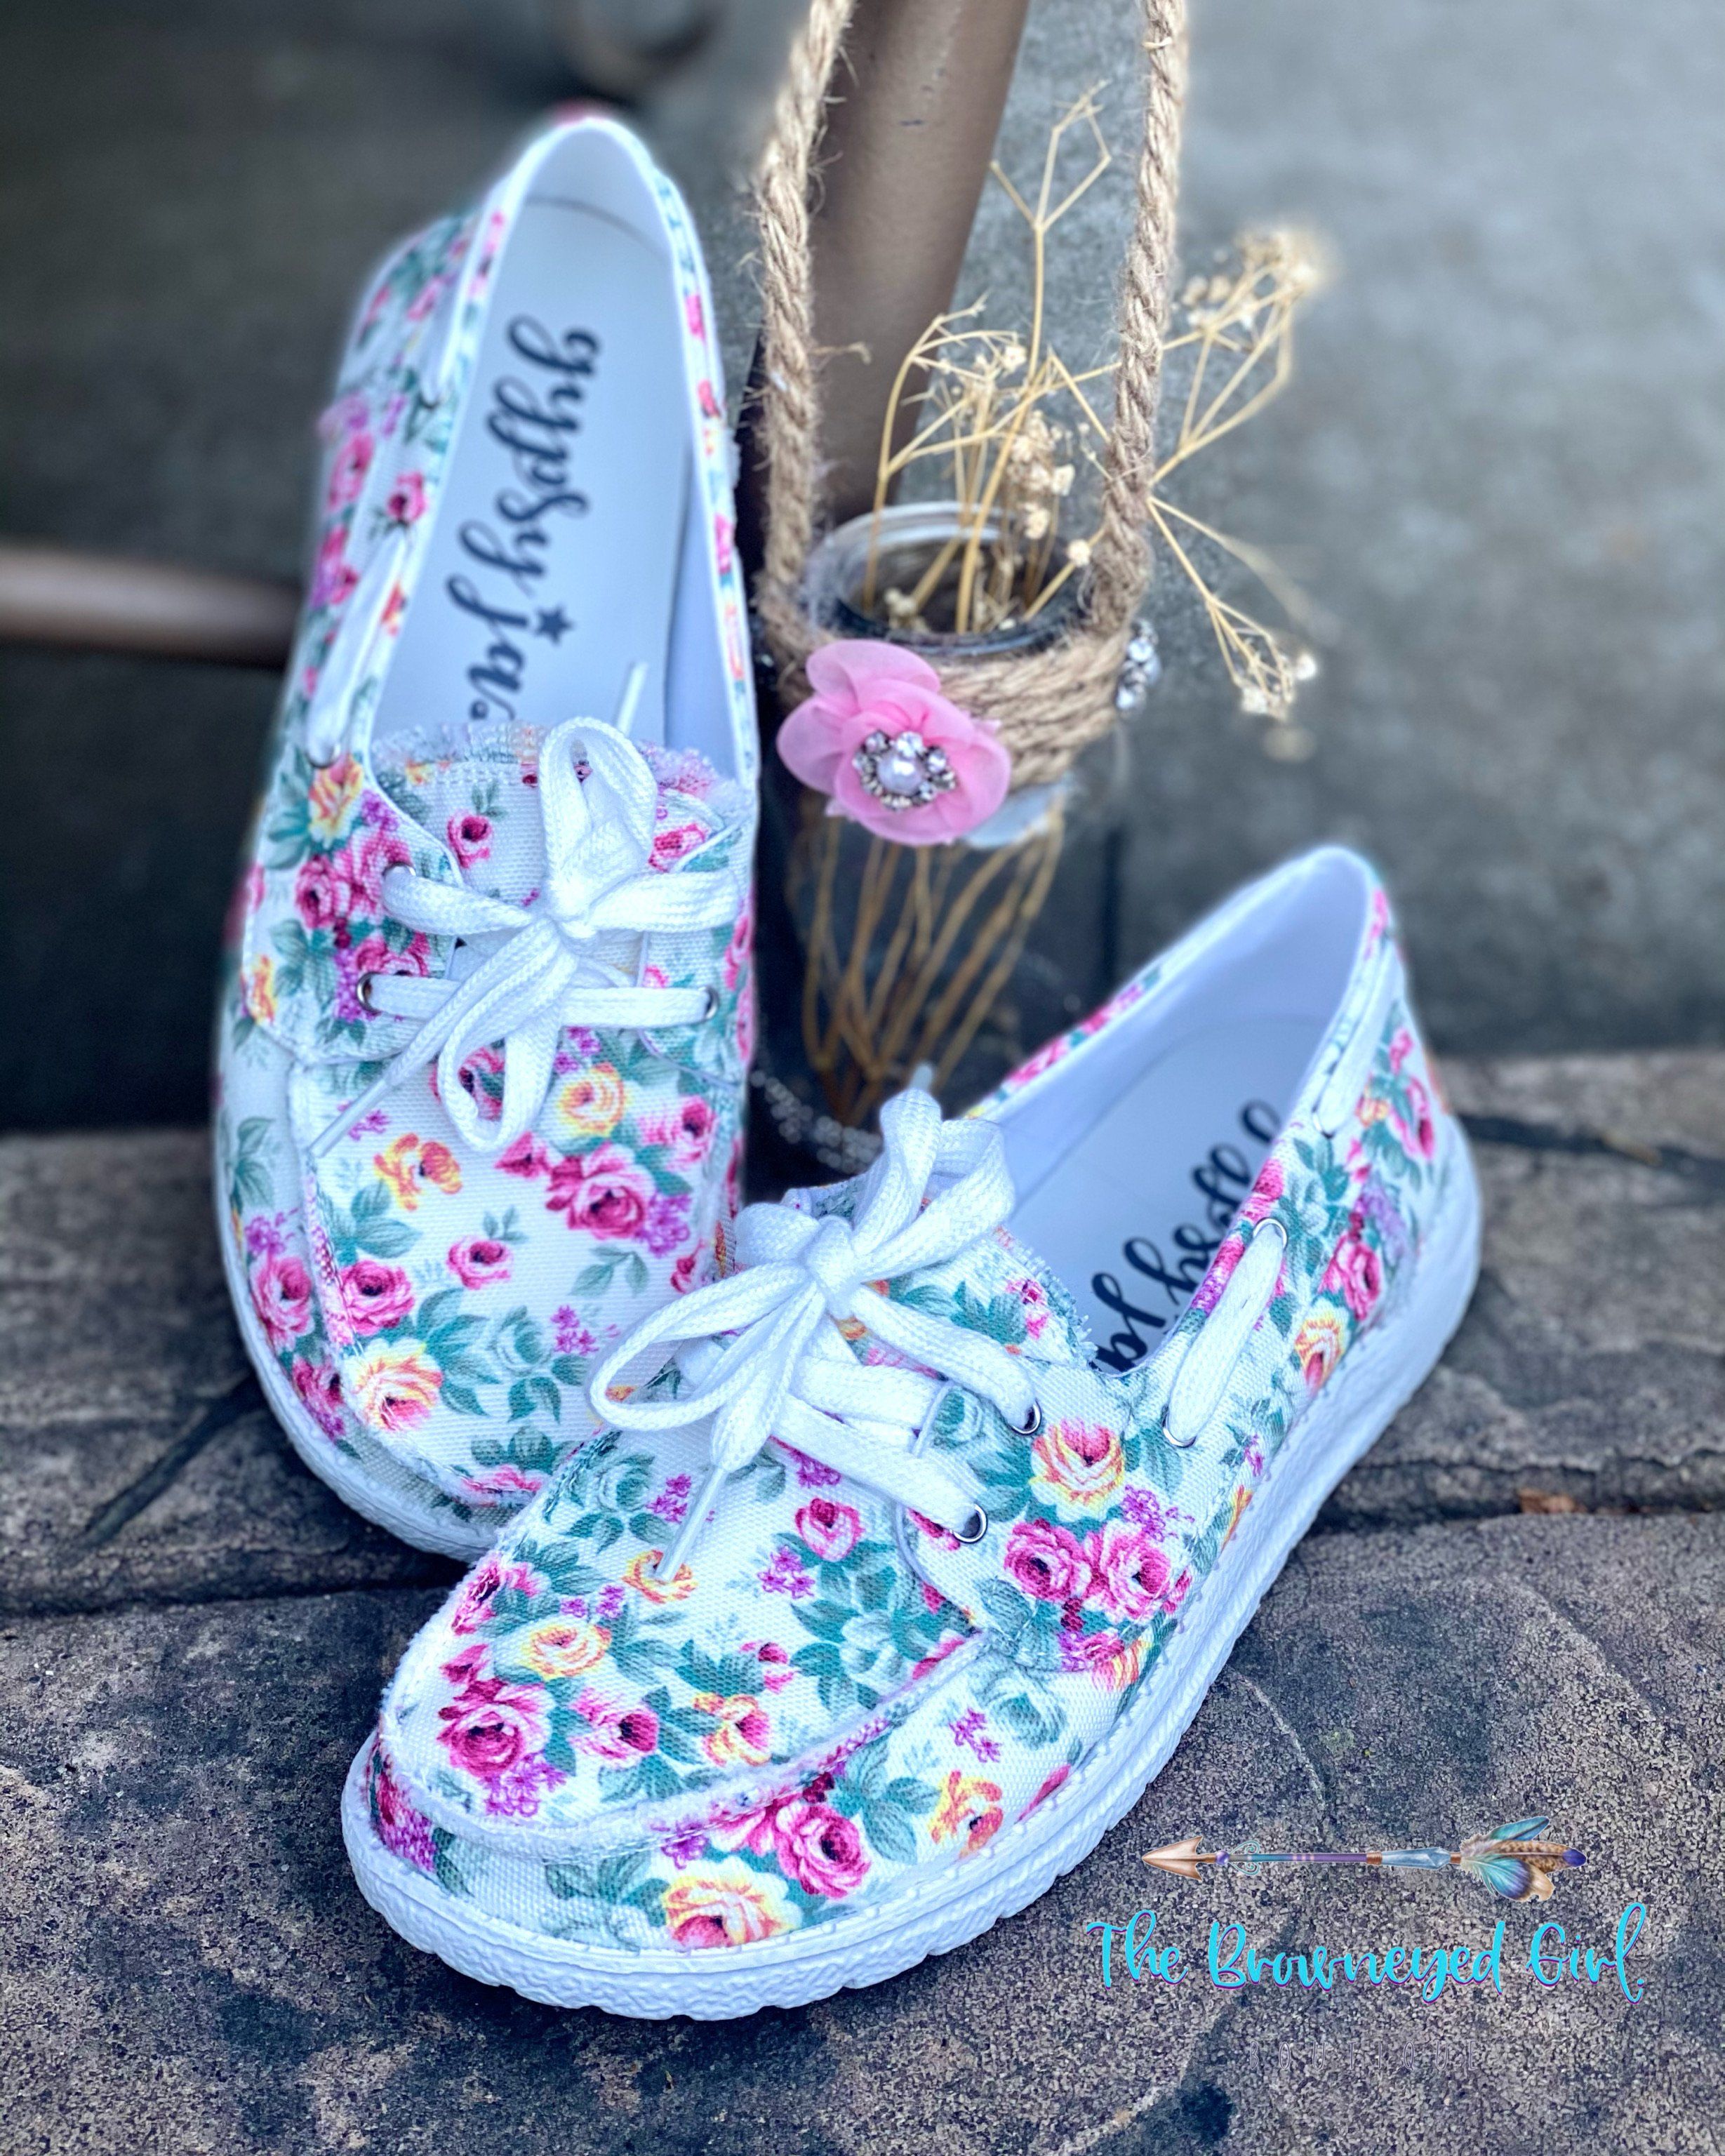 DIY Floral Sneakers {using napkins!} - It's Always Autumn